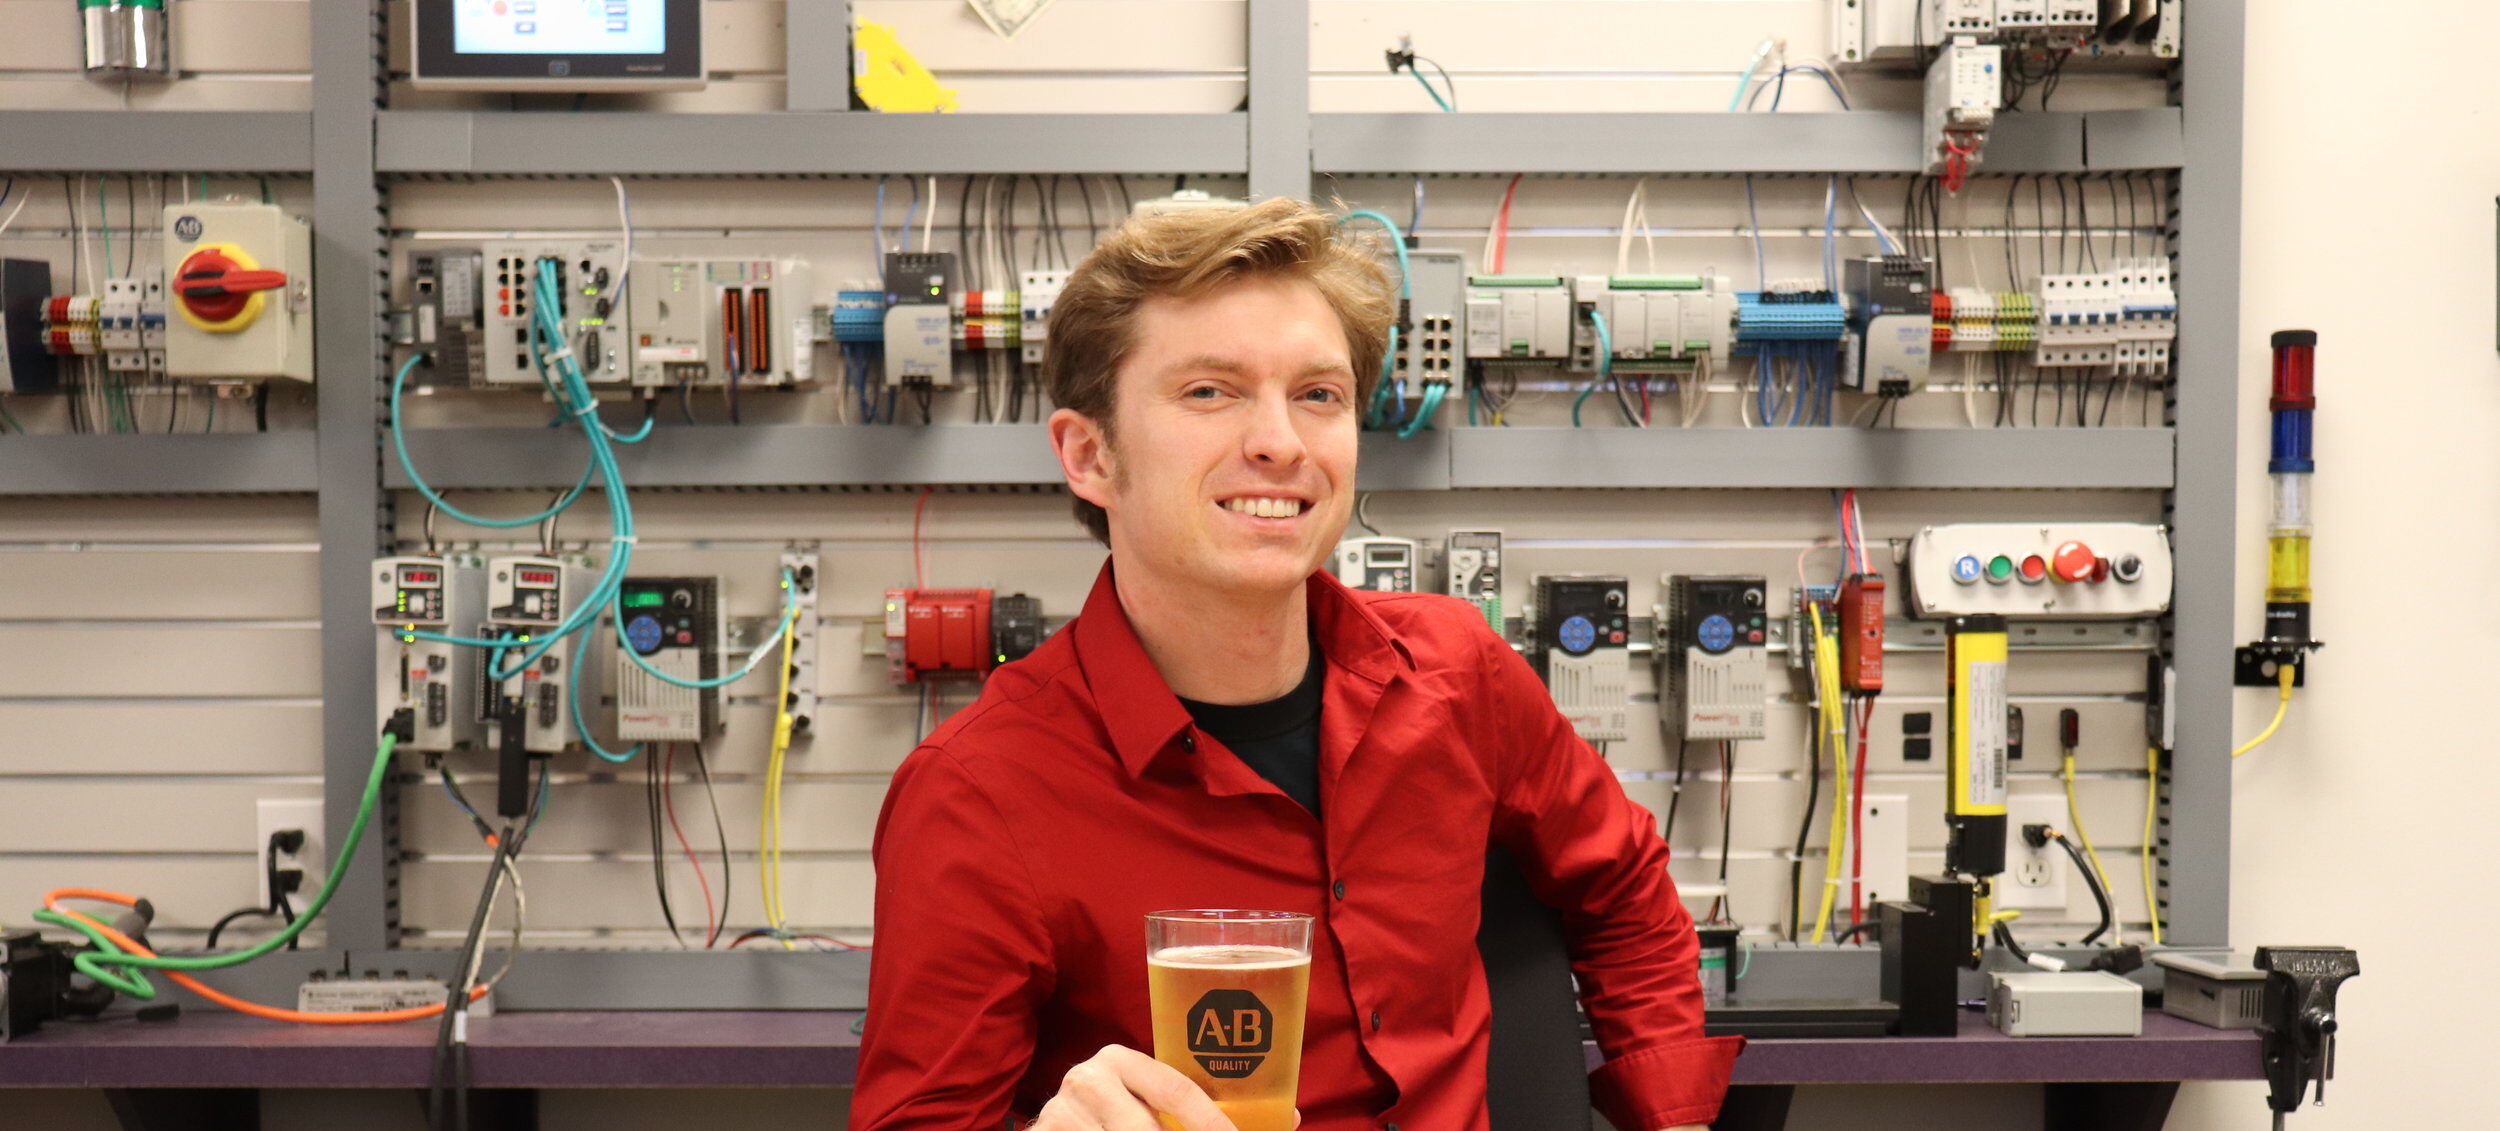 Keeping Tabs on the Industry: A Q&#038;A With “Manufacturing Happy Hour” Host Chris Luecke